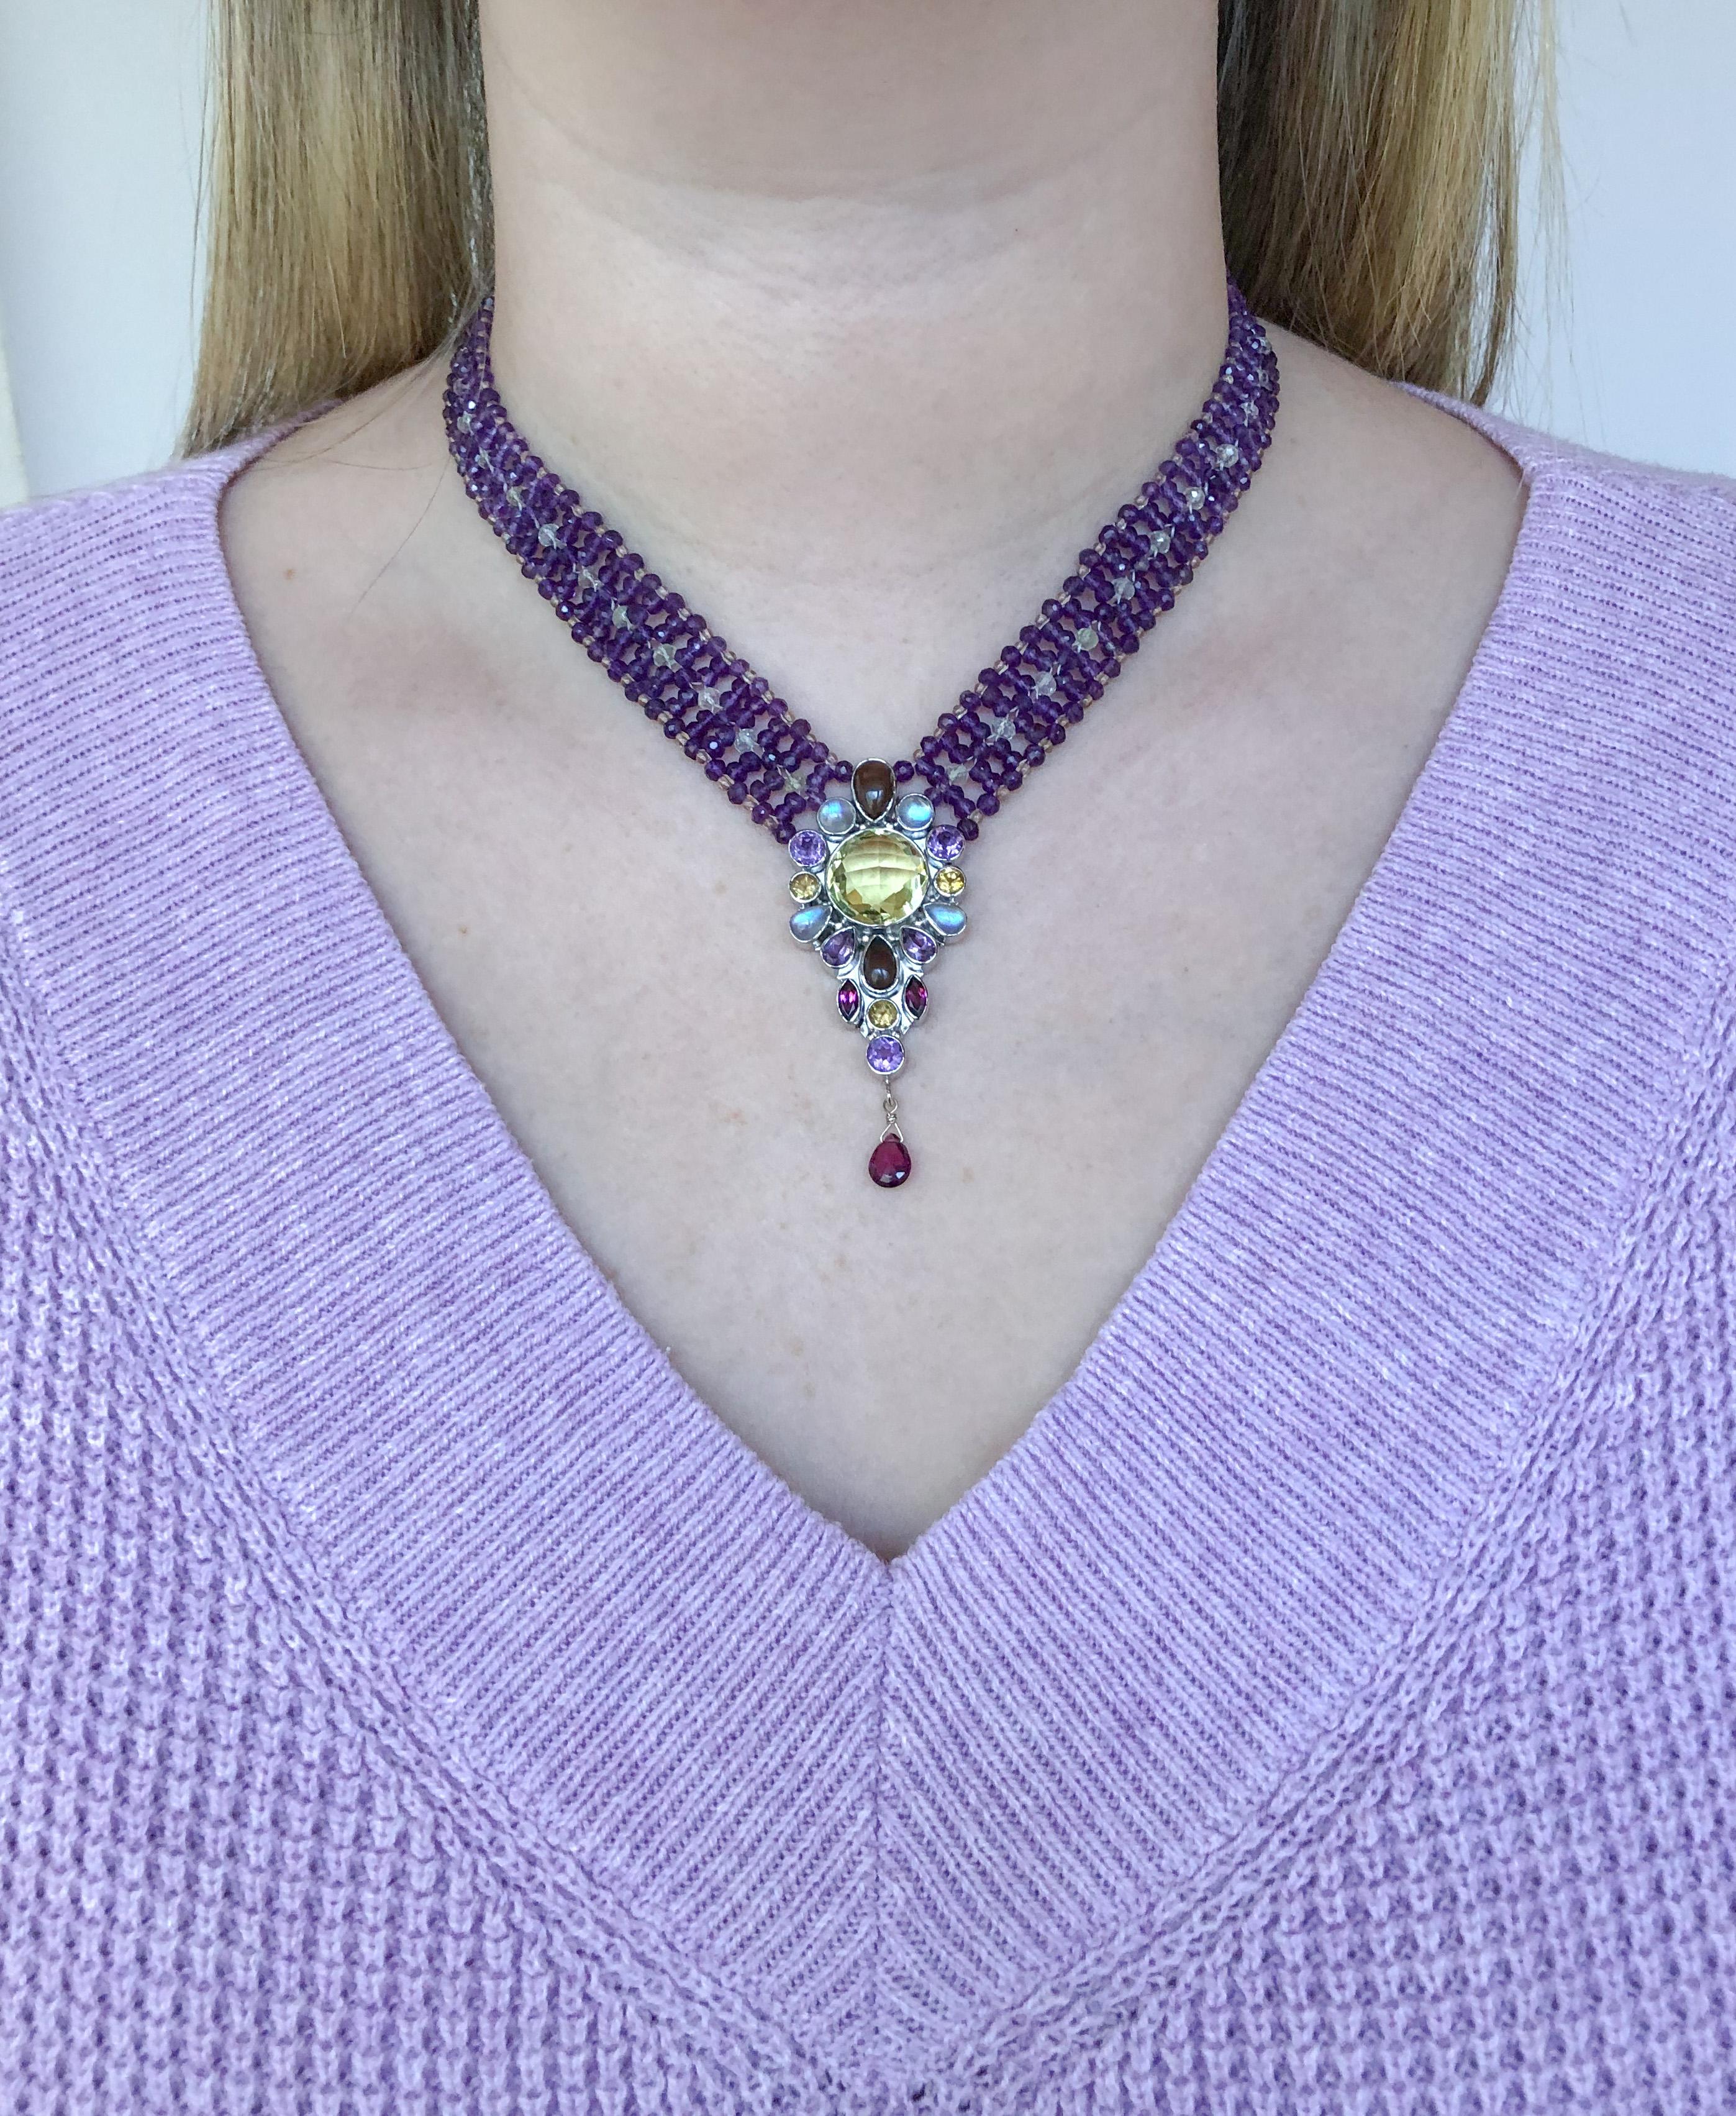 Marina J. Stunning Amethyst Woven Necklace with Garnet, Citrine, Topaz and Opal 1